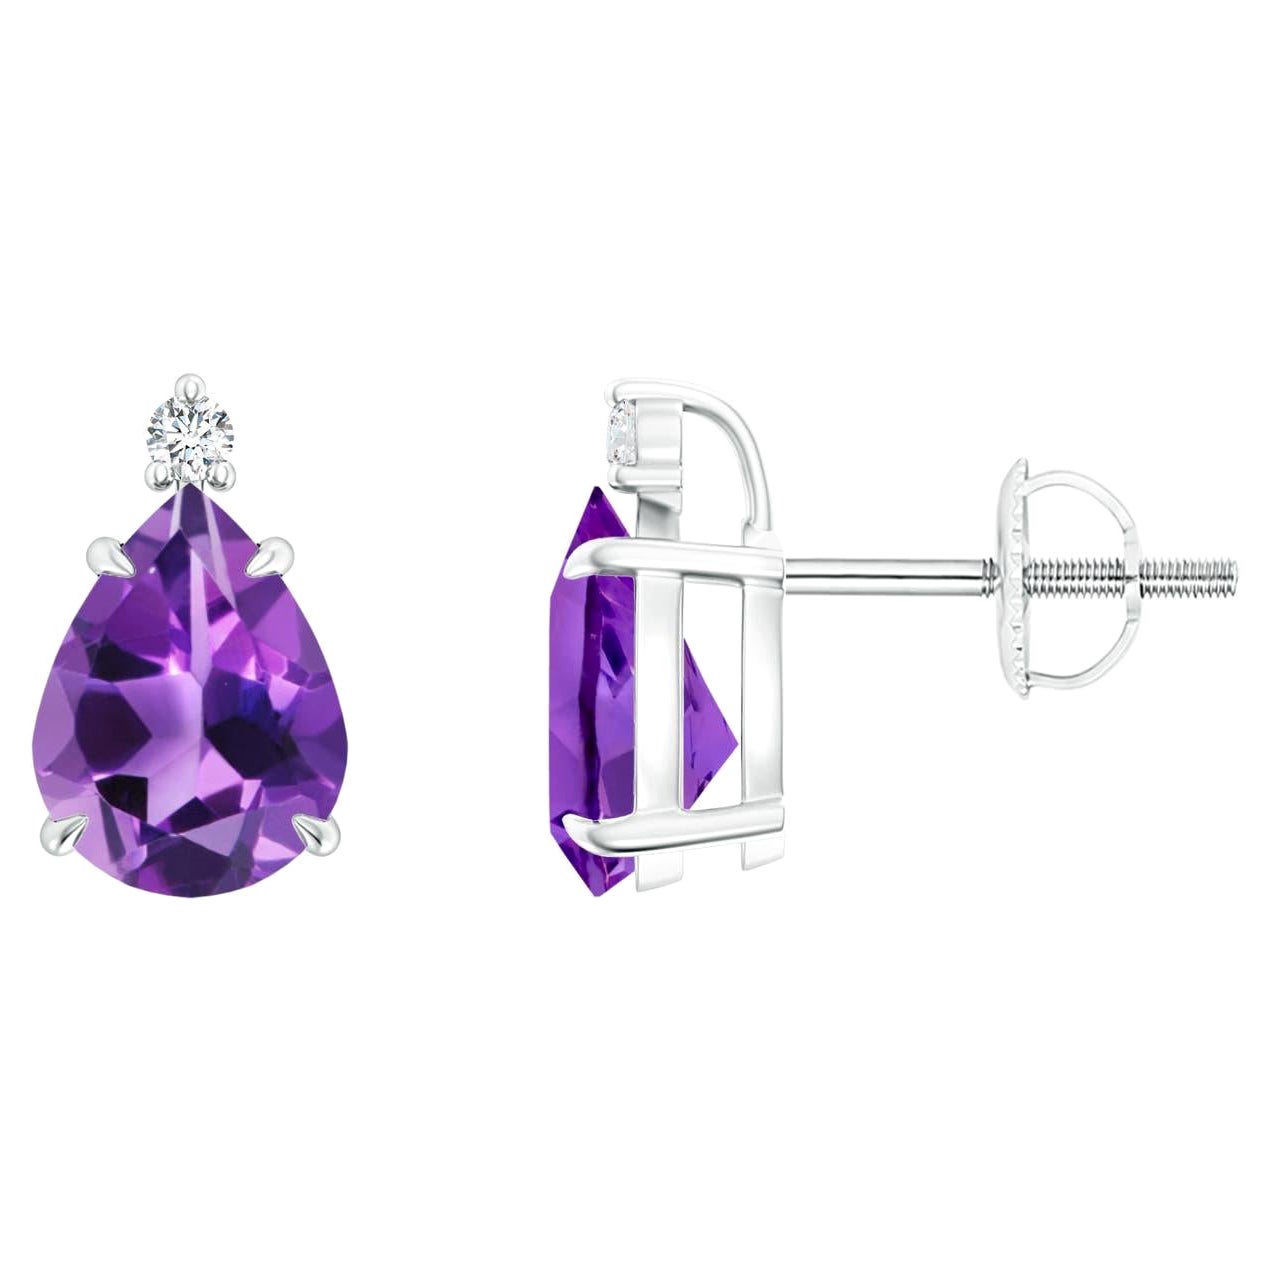 Natural Claw-Set Pear 2ct Amethyst Solitaire Earrings in Platinum